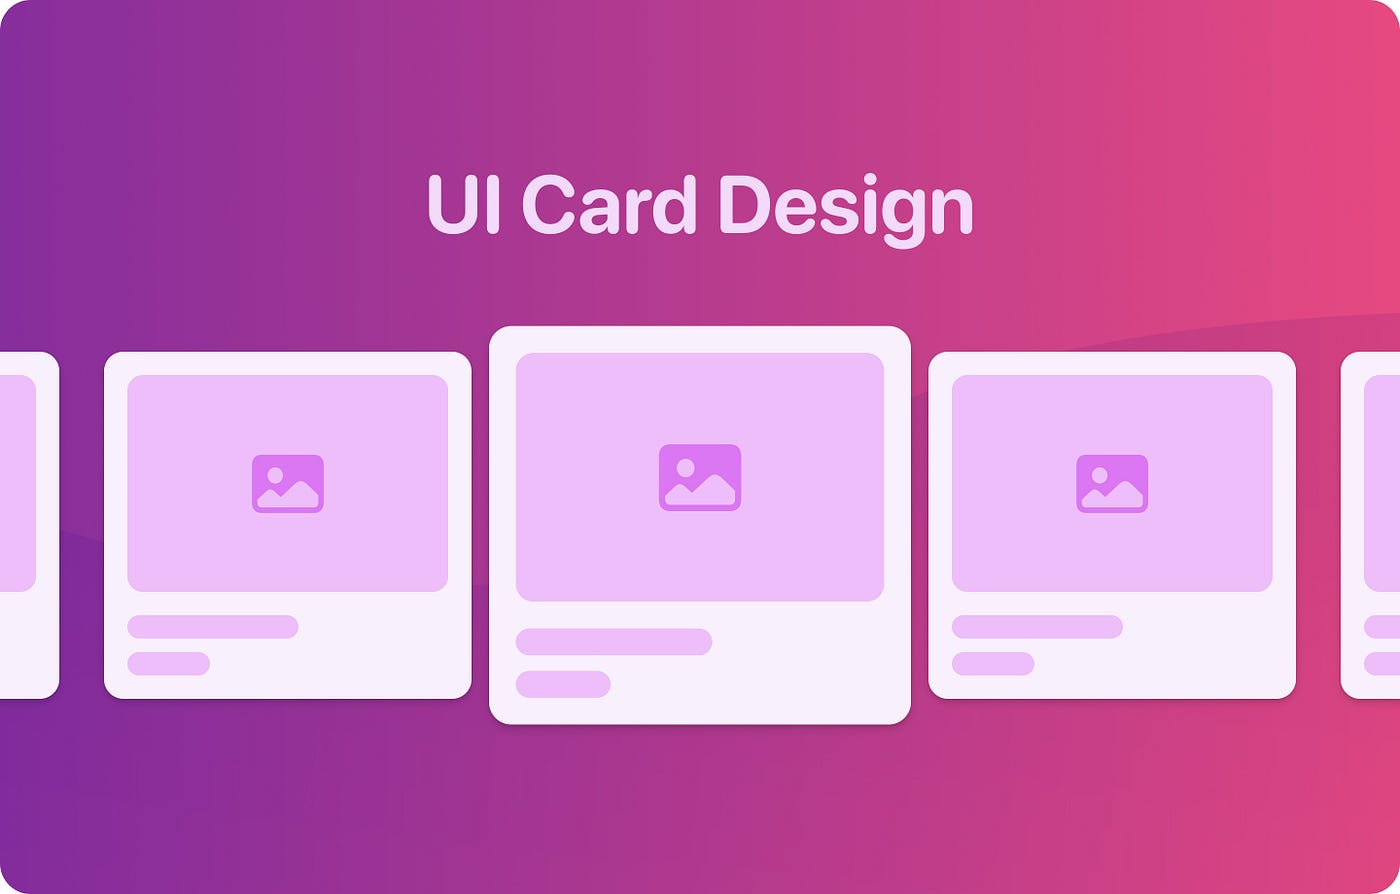 8 best practices for UI card design, by Ana & Vlad